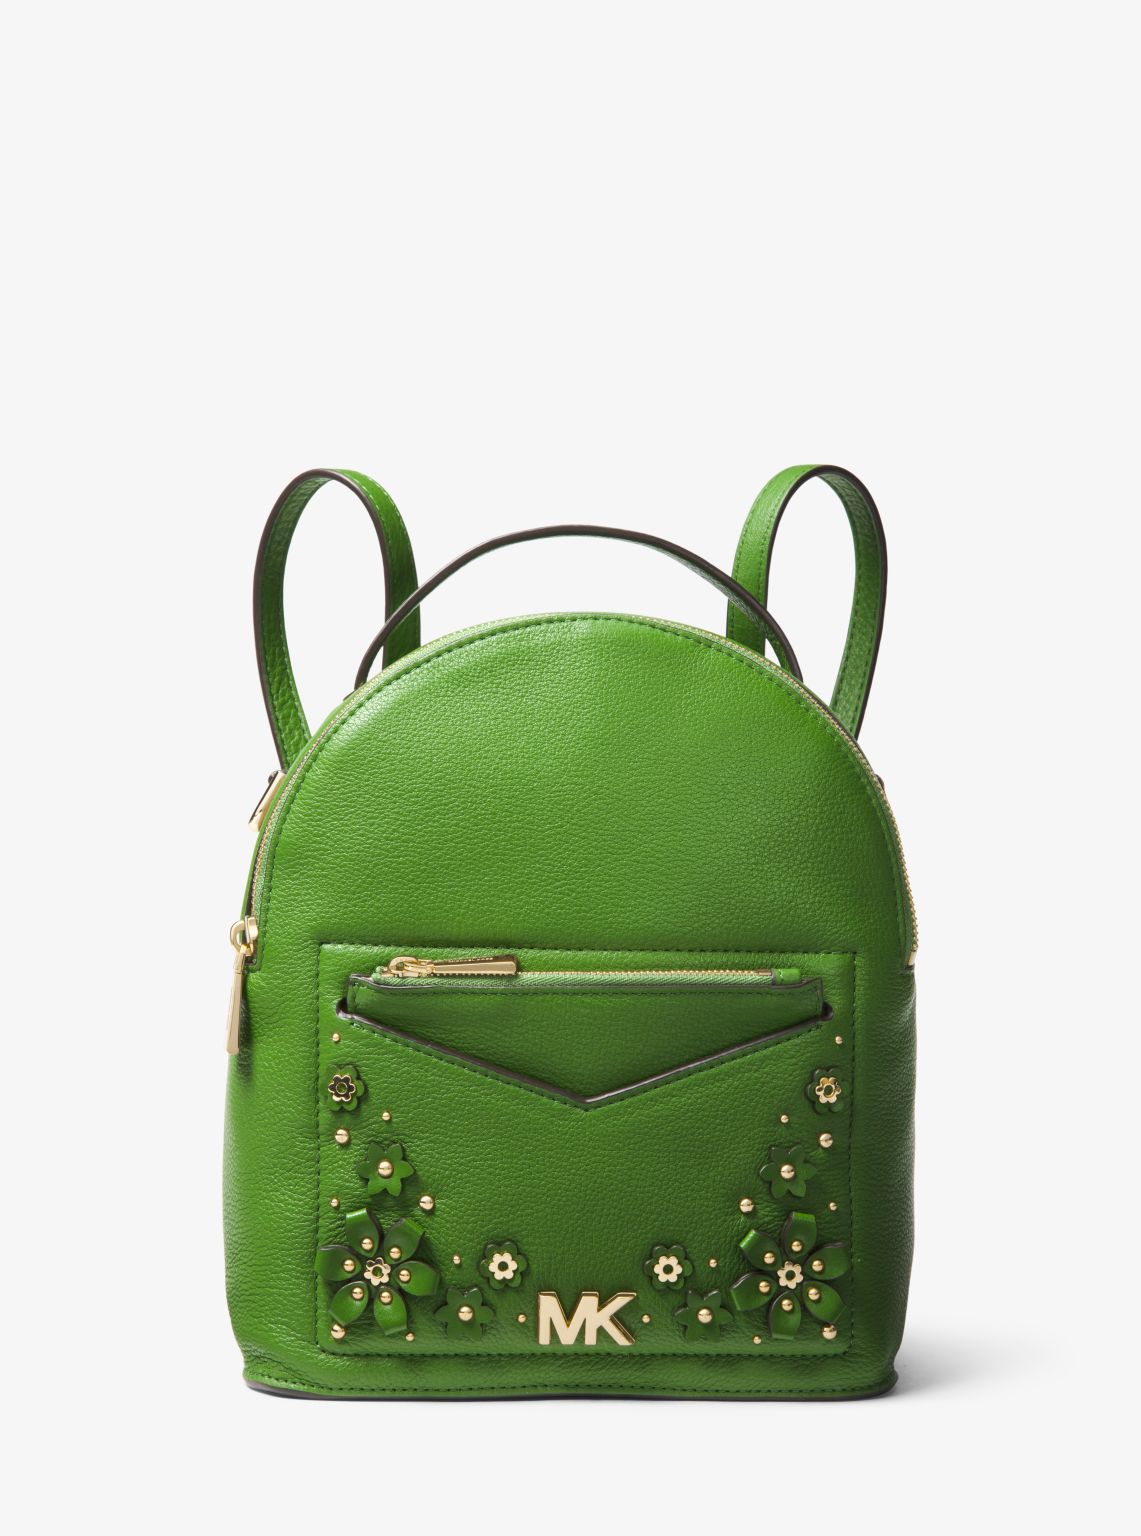 Jessa Small Floral Embellished Pebbled Leather Convertible Backpack